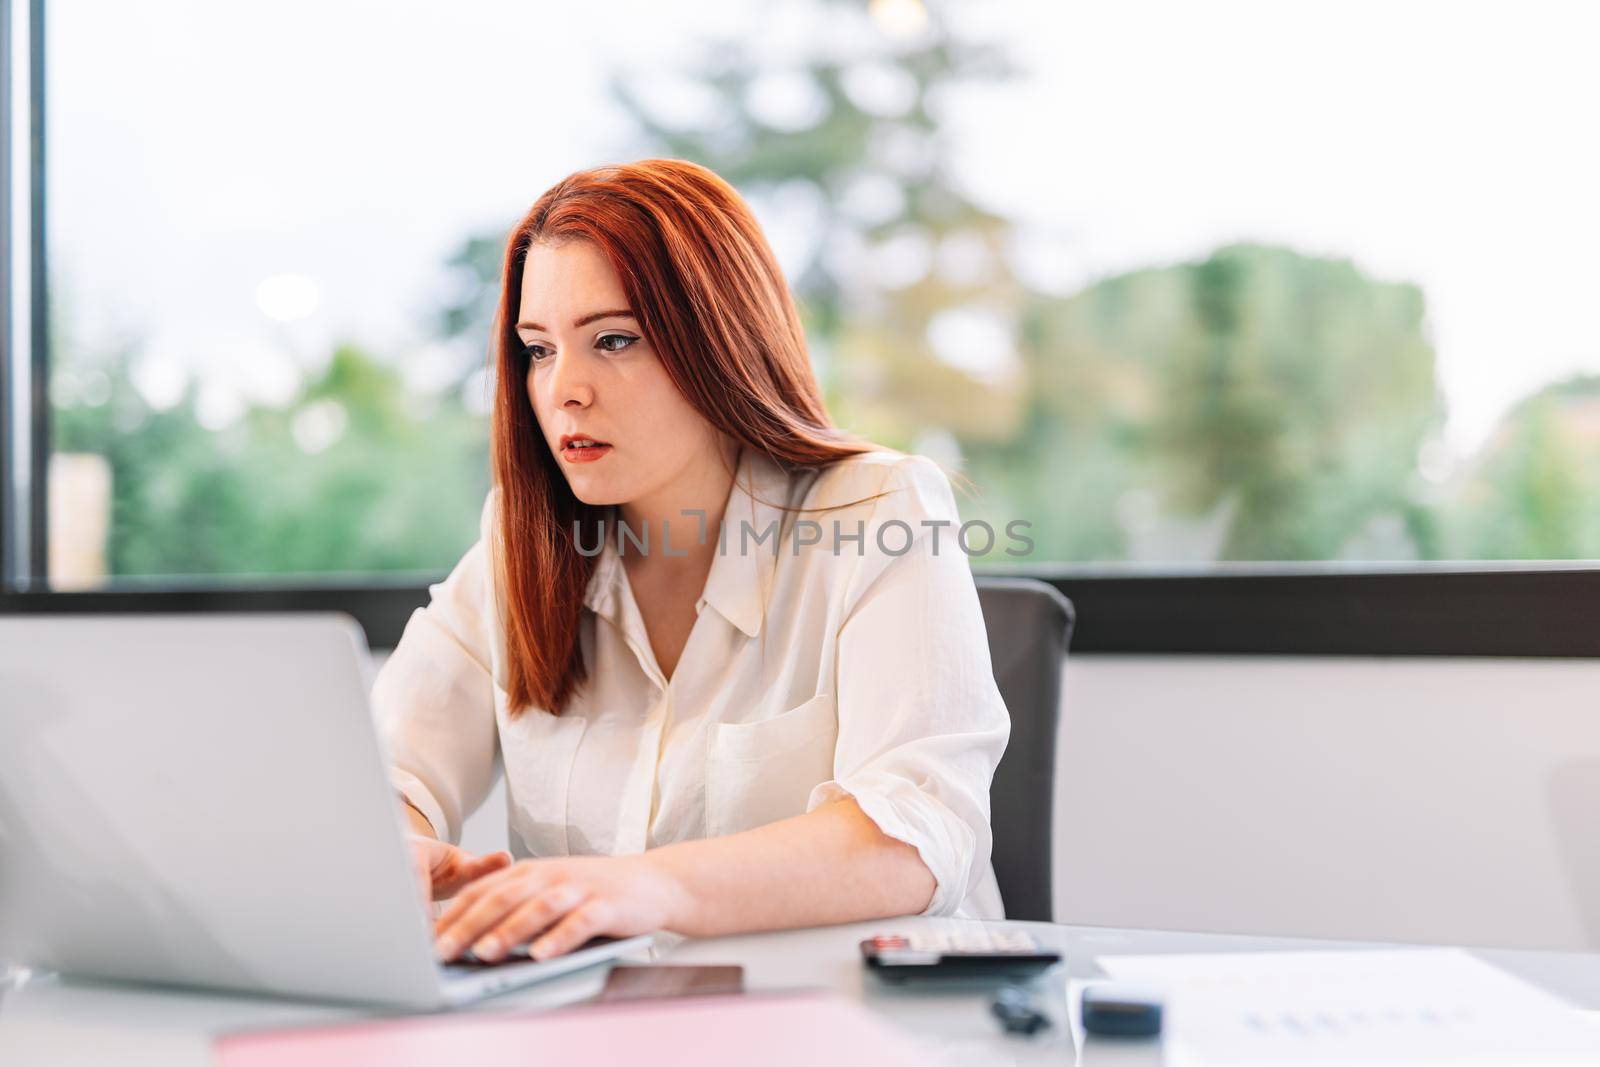 Pretty young red-haired woman in white shirt teleworking on a white laptop from home. She is typing on the laptop while working on her own business. Young entrepreneur and self-employed. She is in an office or at home with a large window behind her with natural light.